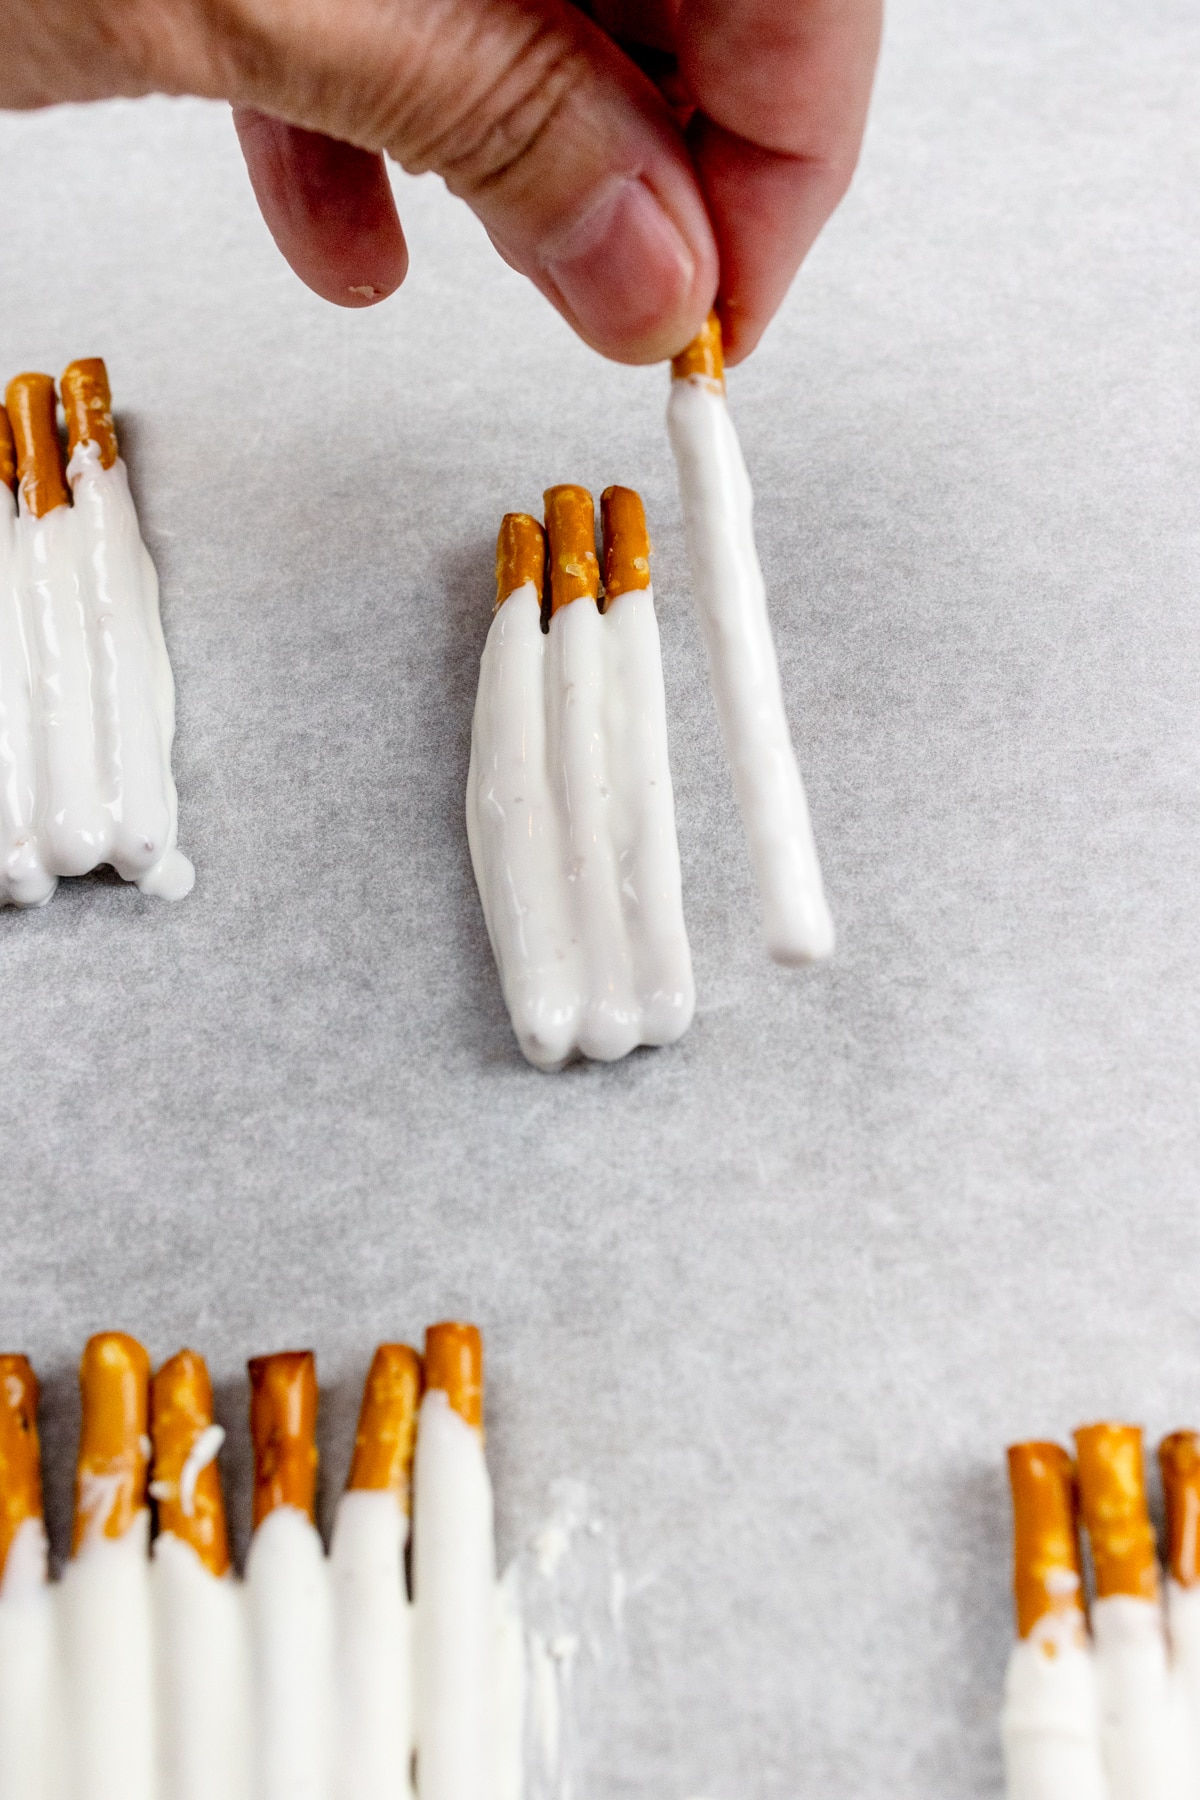 Close up of groups of 5-6 pretzel sticks individually dipped in white chocolate, on a baking tray lined with parchment paper.